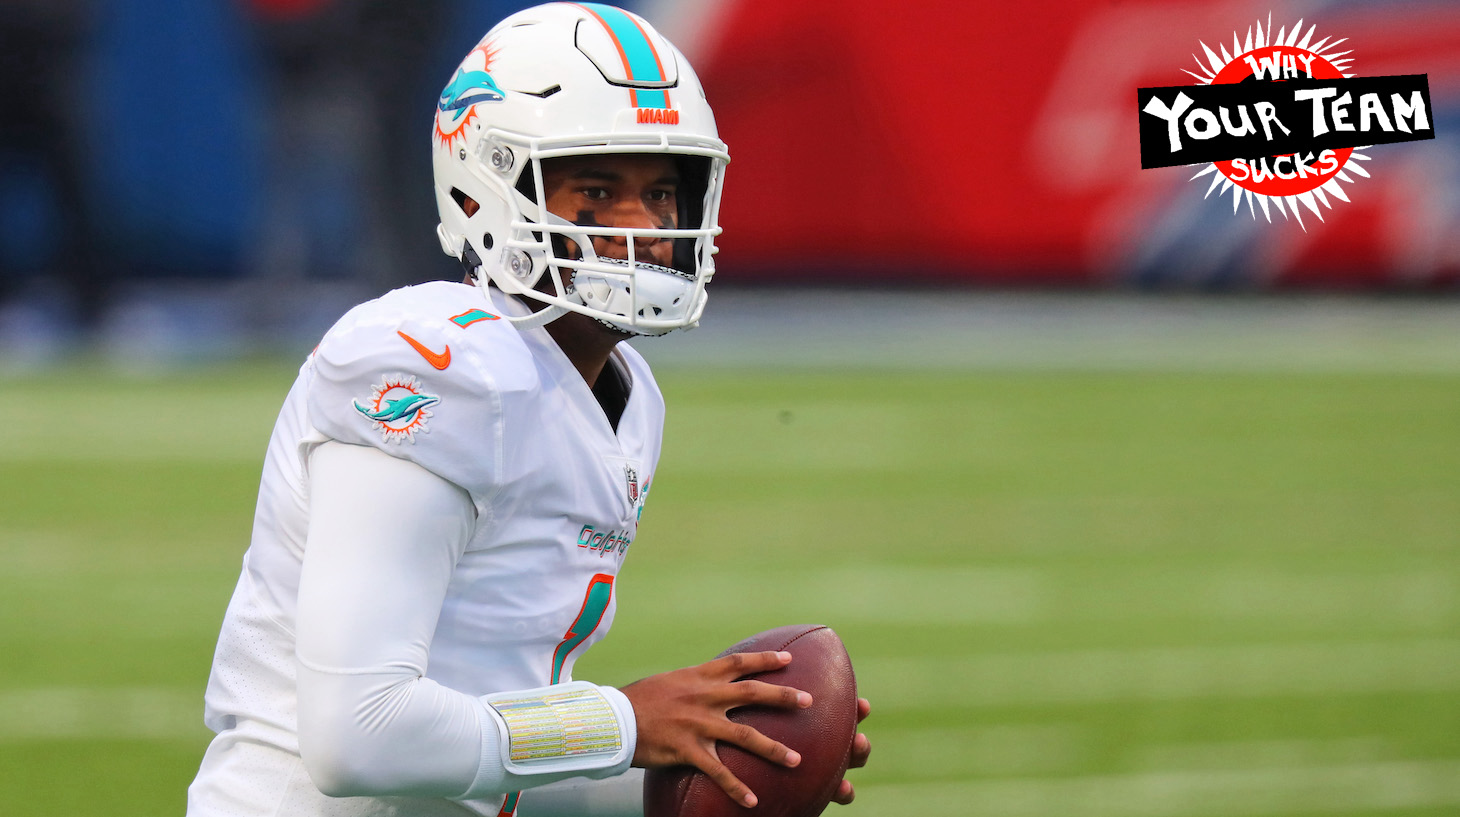 ORCHARD PARK, NEW YORK - JANUARY 03: Tua Tagovailoa #1 of the Miami Dolphins warms up before the game against the Buffalo Bills at Bills Stadium on January 03, 2021 in Orchard Park, New York. (Photo by Timothy T Ludwig/Getty Images)